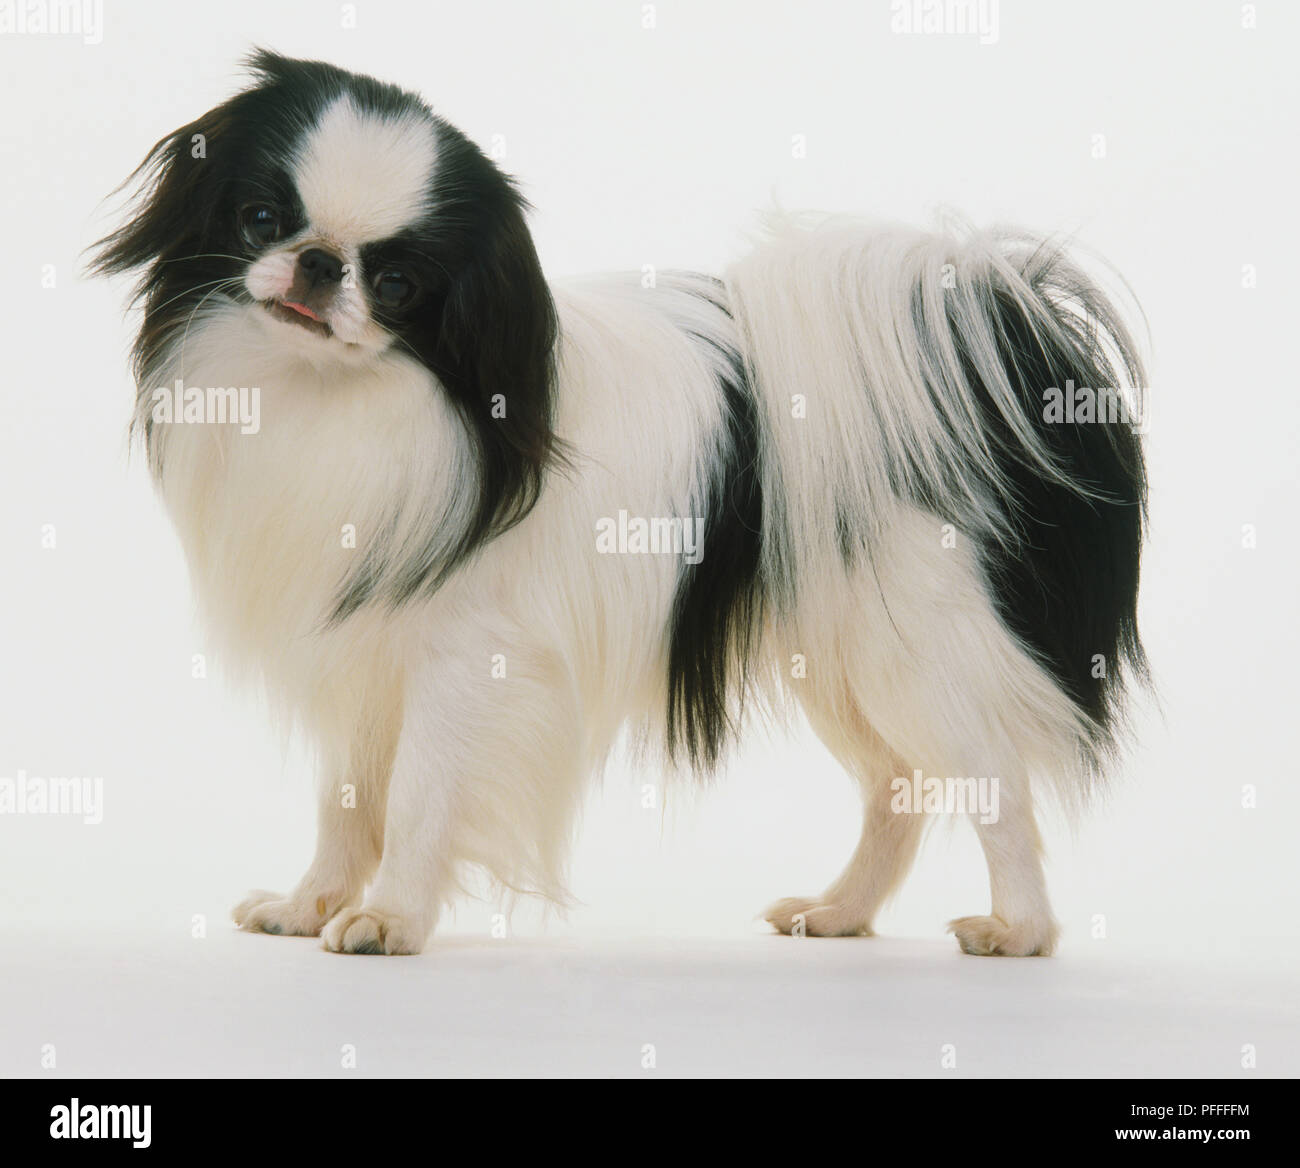 Black and white coloured Japanese Chin dog (Canis familiaris), head turned towards camera, side view. Stock Photo